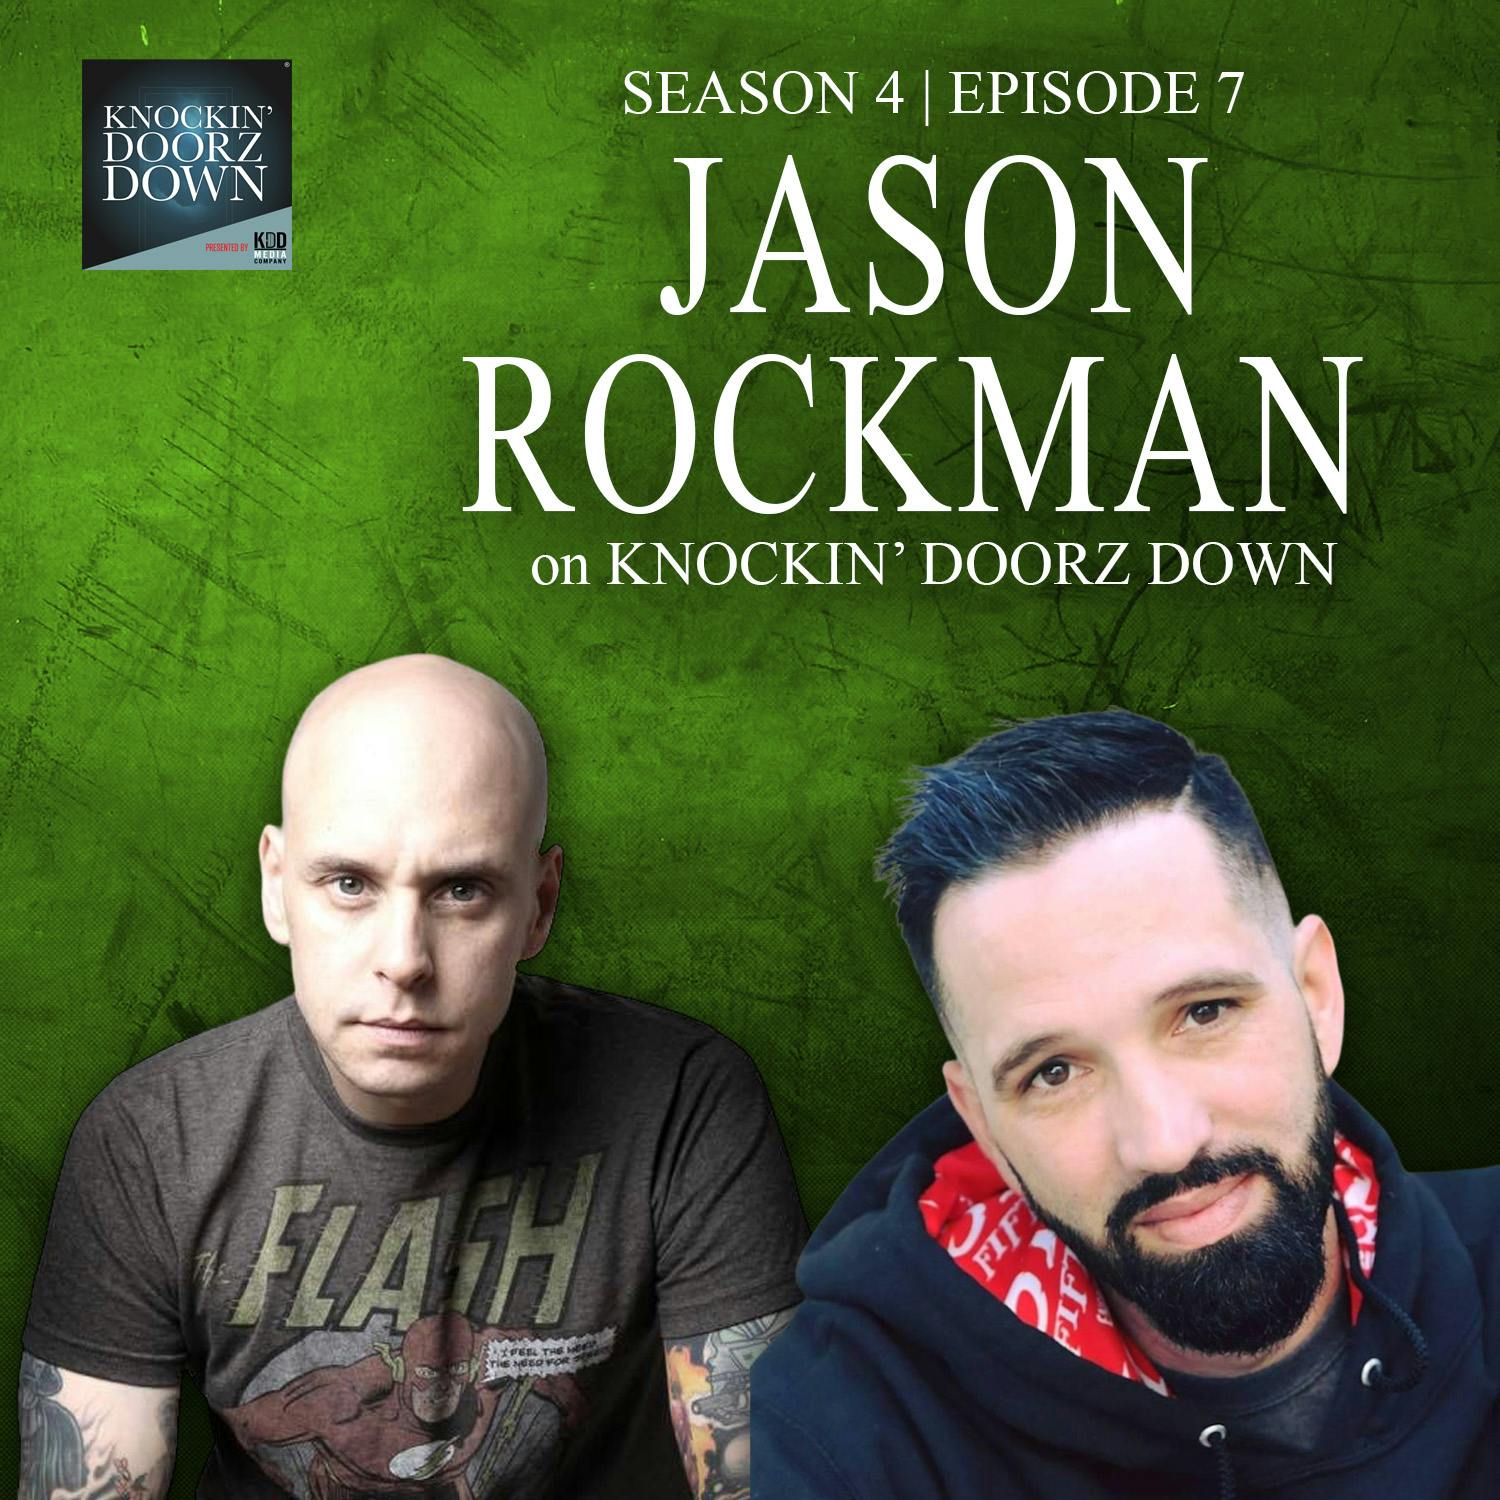 Jason Rockman | Sobriety In Early 20's, Touring Musician, Radio DJ, Combat Sports, Comic Cons, Rock Music Festivals And Hope